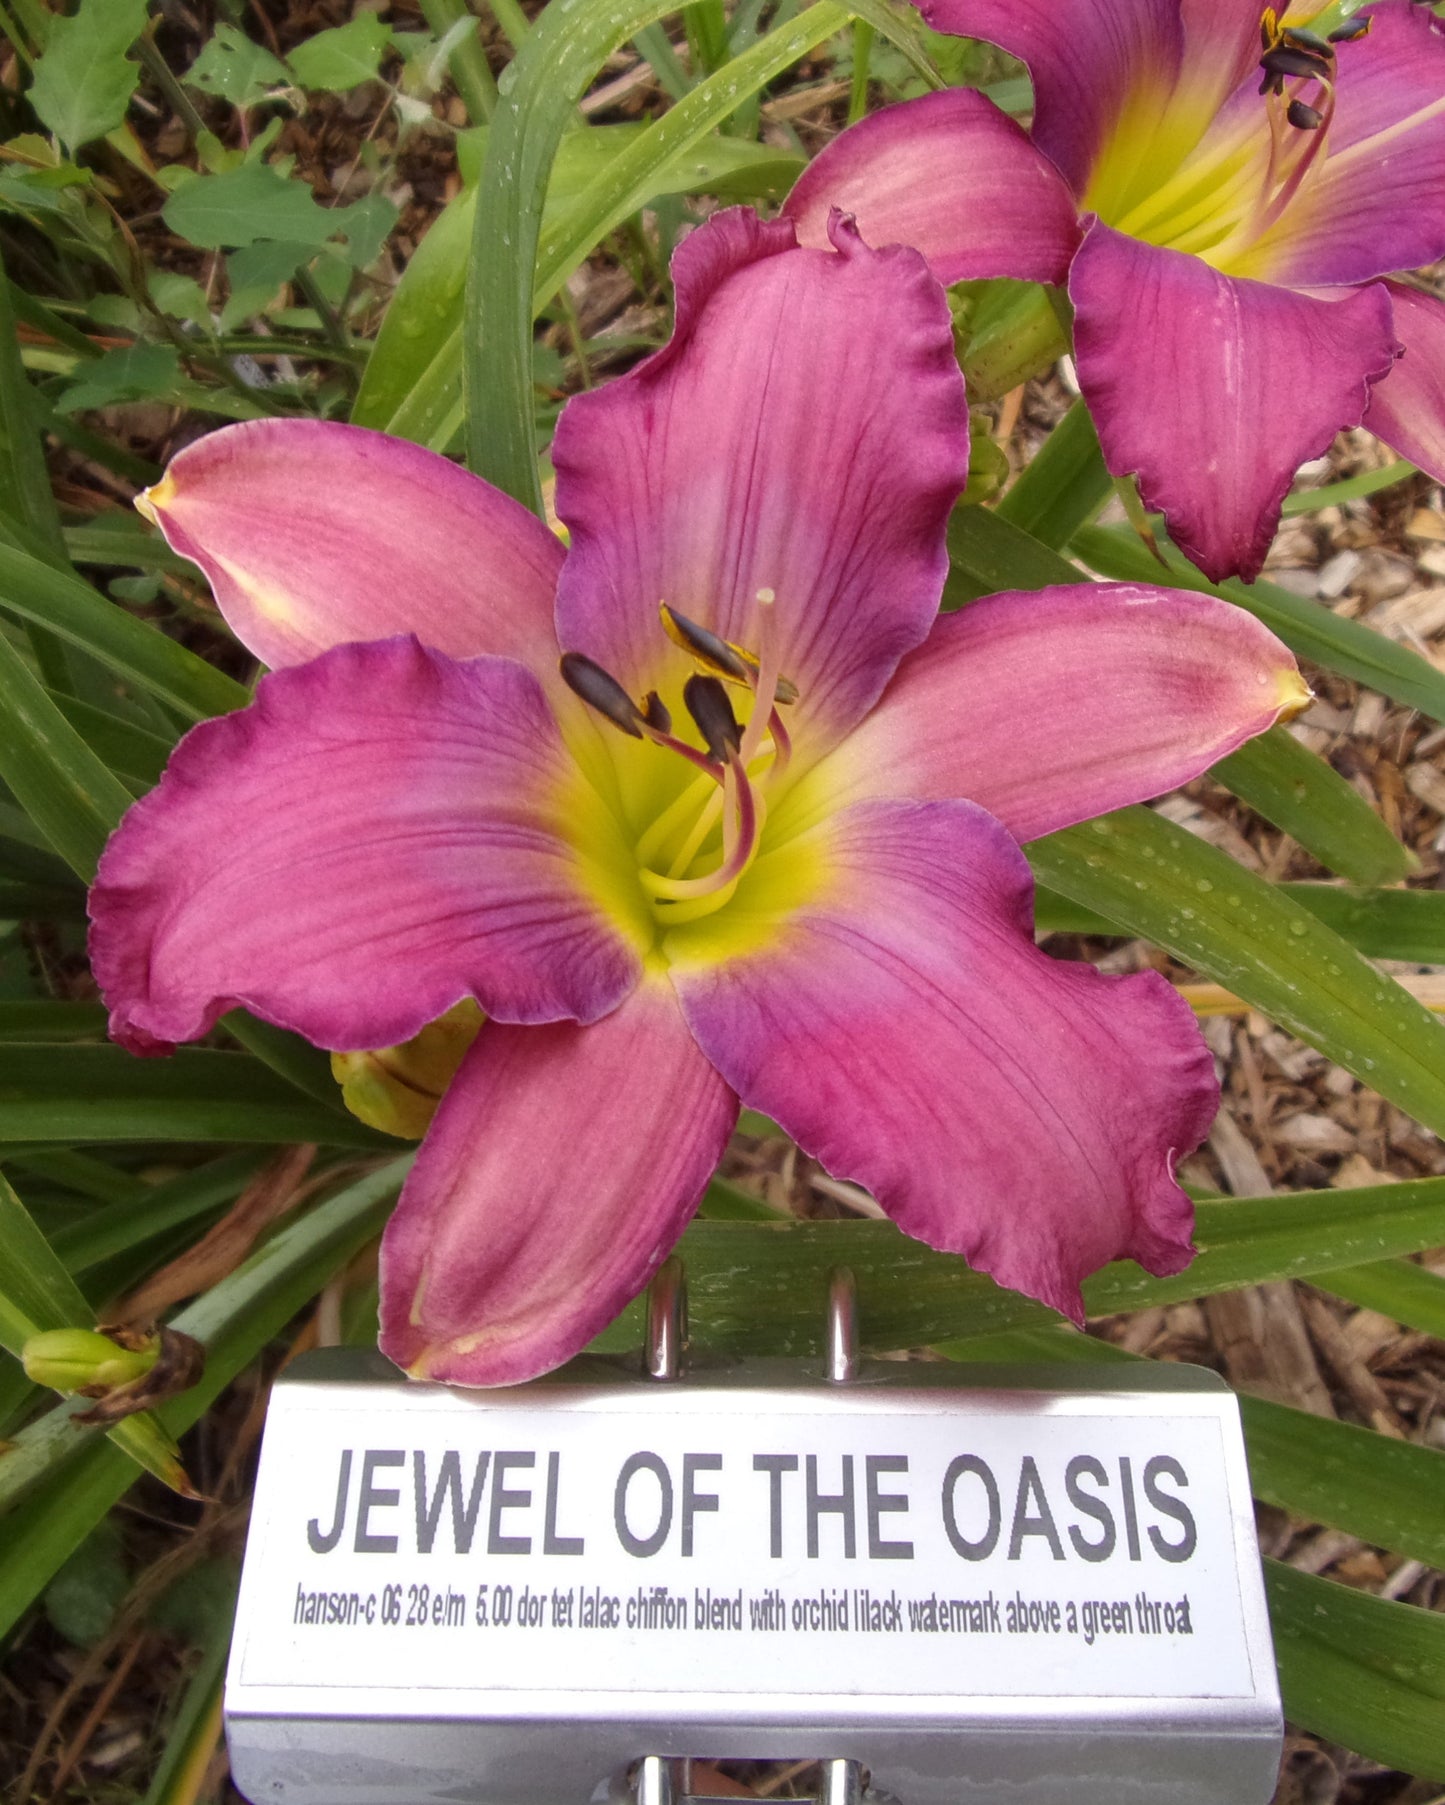 JEWEL OF THE OASIS